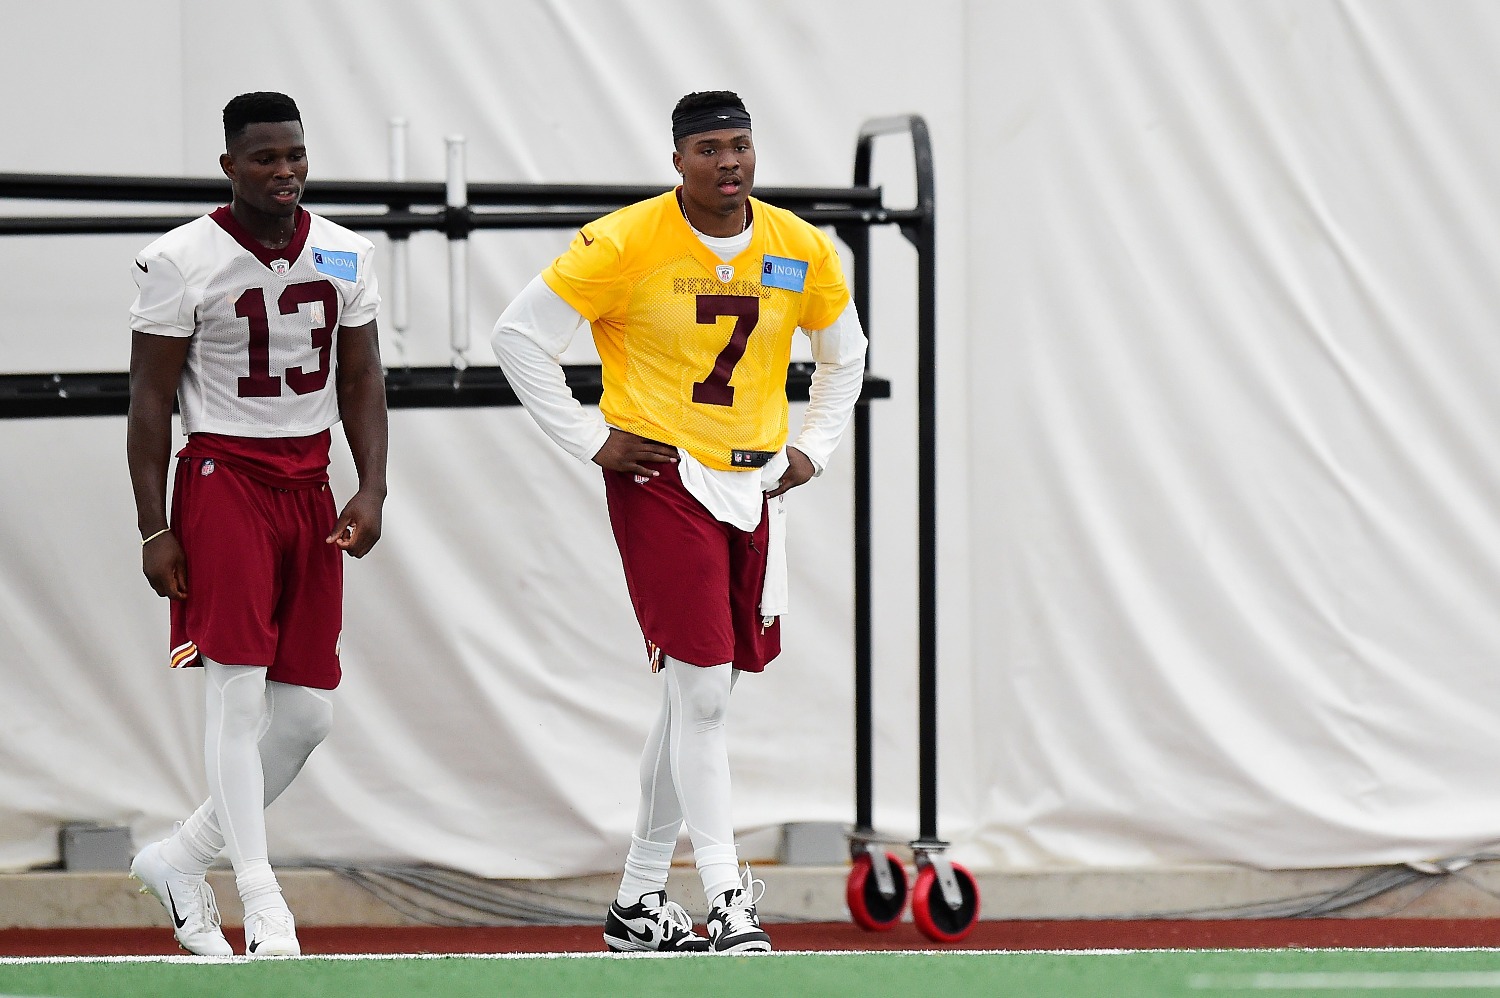 Washington Redskins face a potential disaster other than Dan Snyder if Dwayne Haskins doesn't take a step forward in his development.